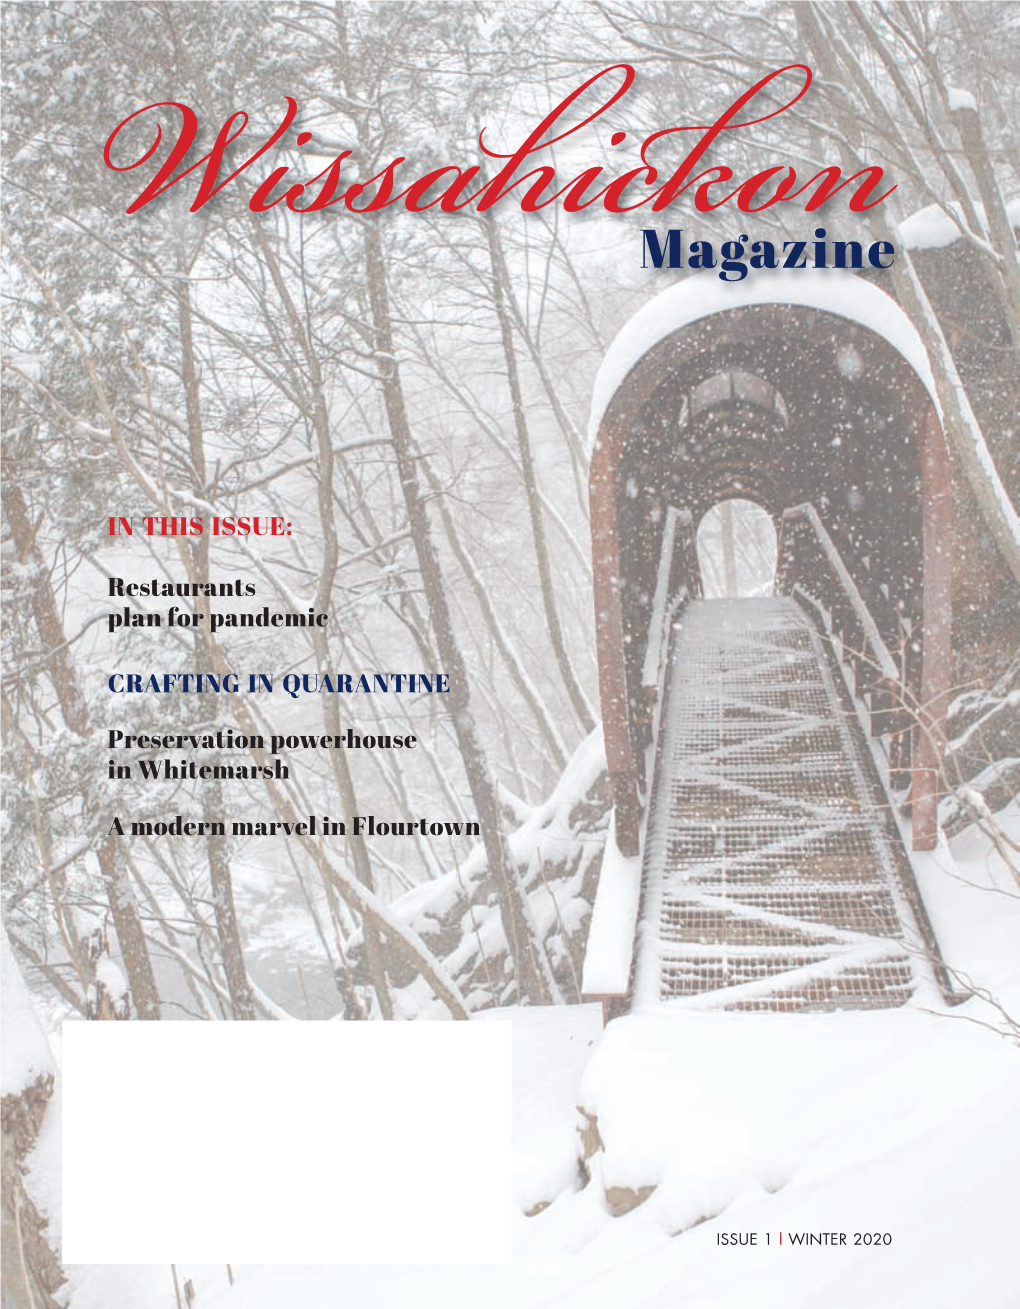 Wissahickon Magazine Is Published Quarterly by the Chestnut Hill Local, 8434 Germantown Avenue, Philadelphia PA 19118, 215-248-8800, Online at Chestnuthilllocal.Com